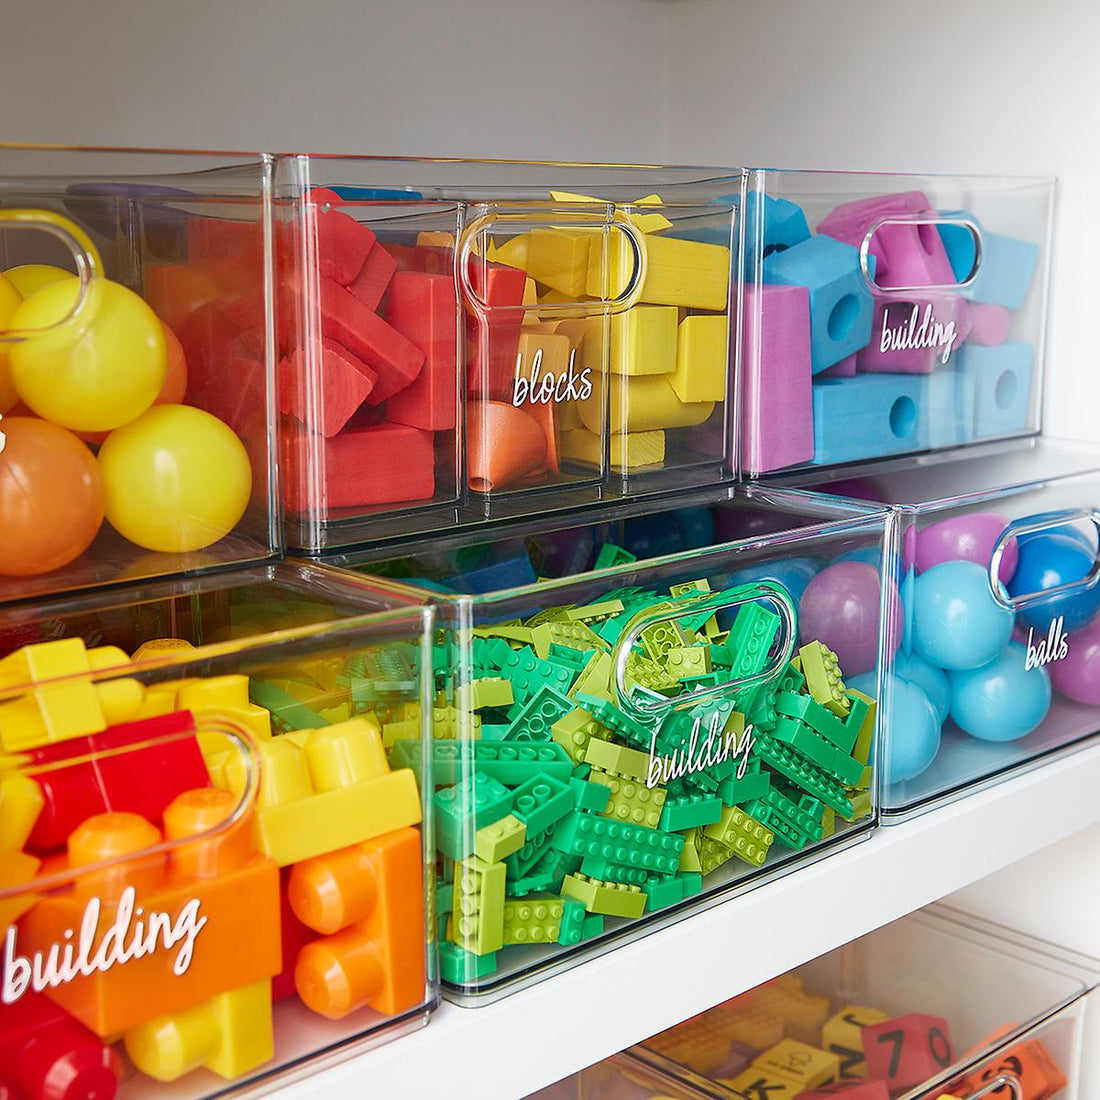 Here's where to buy cheap storage bins from